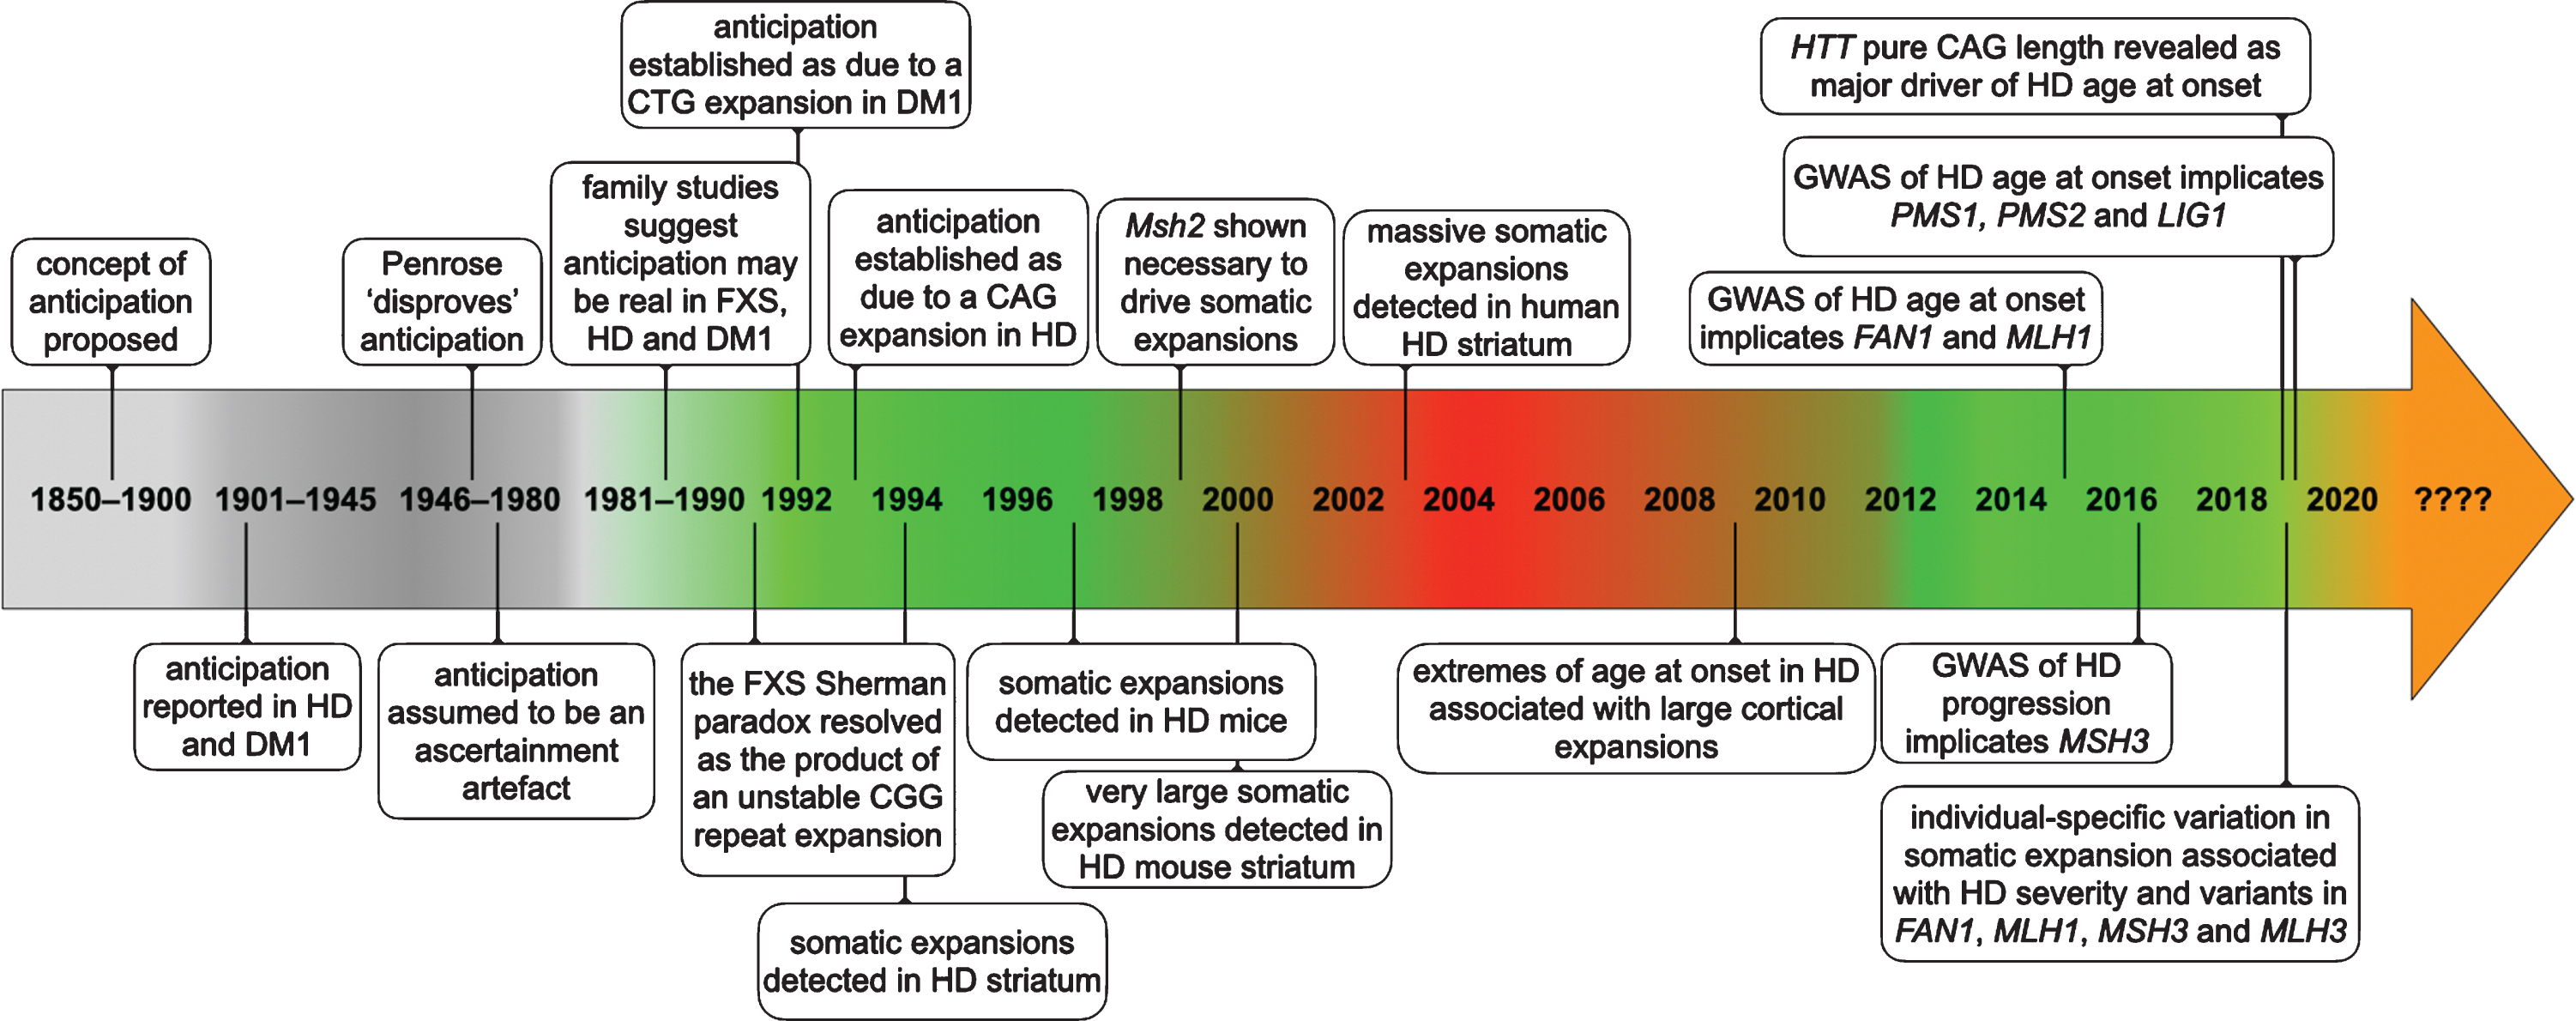 Timeline of some of the key events establishing anticipation as a genuine biological phenomenon and somatic expansion as contributing toward HD pathology.